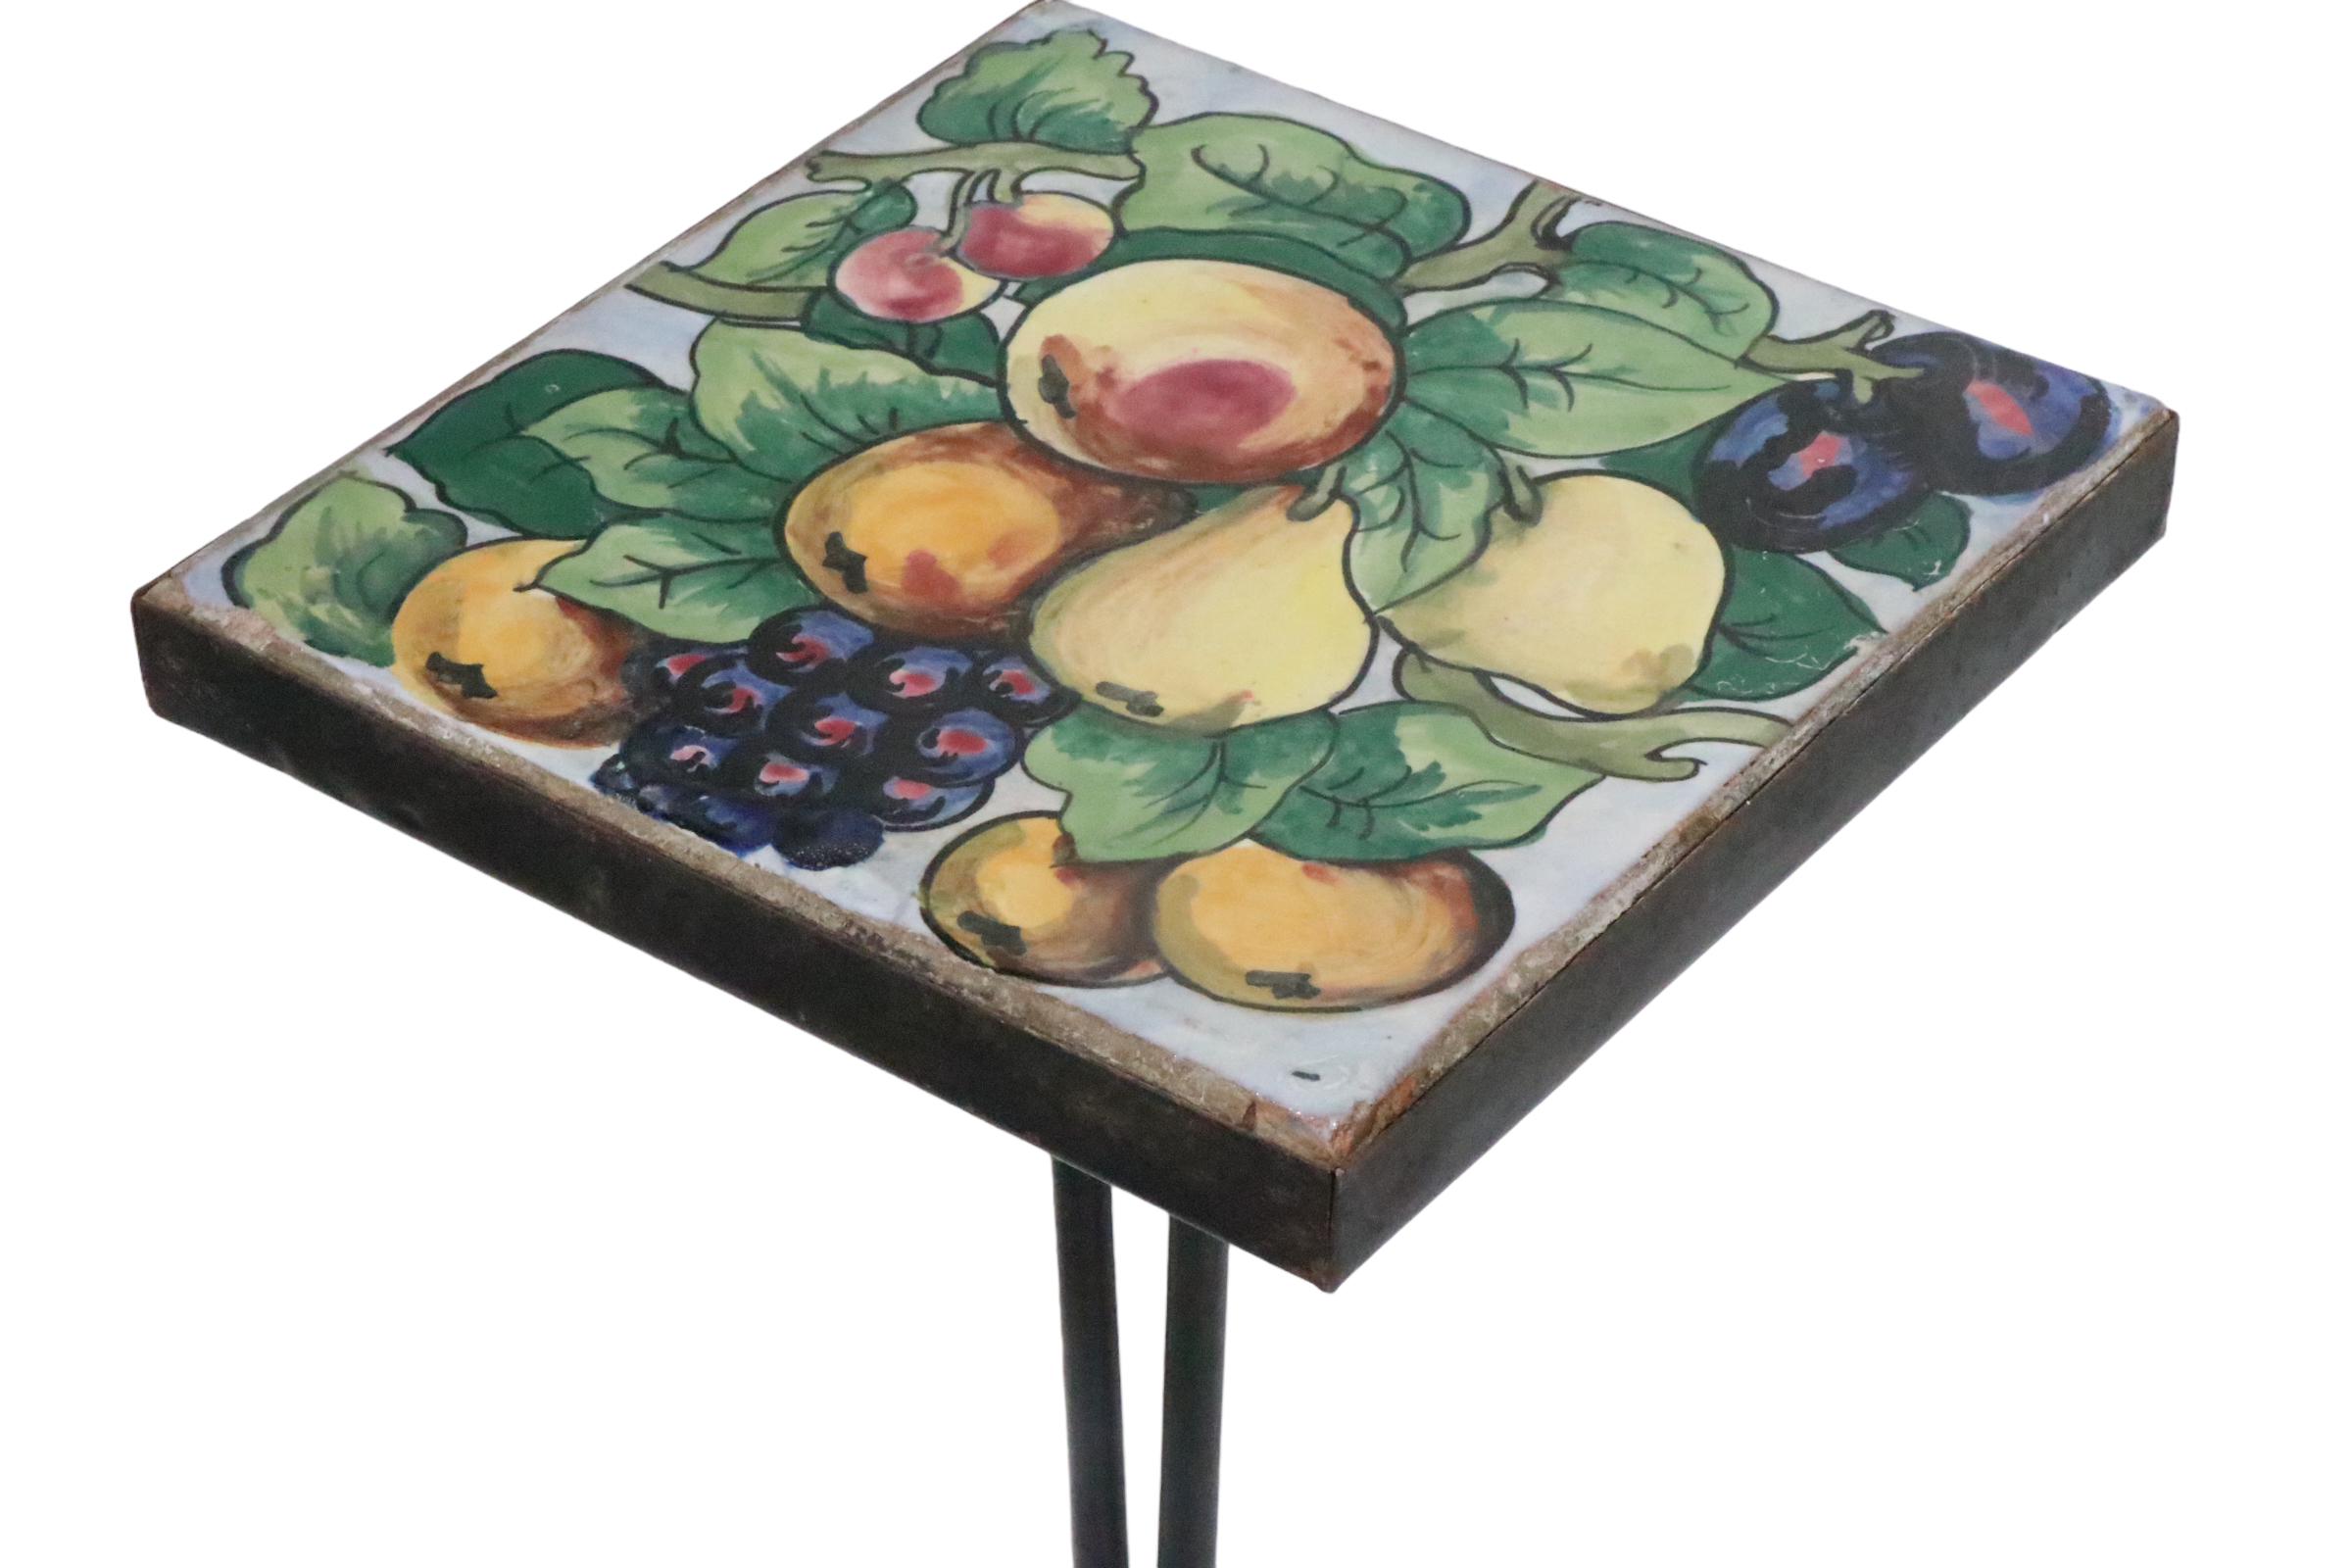 Wrought iron and Tile Top Table att. to Addison Mizner c 1920's In Good Condition For Sale In New York, NY